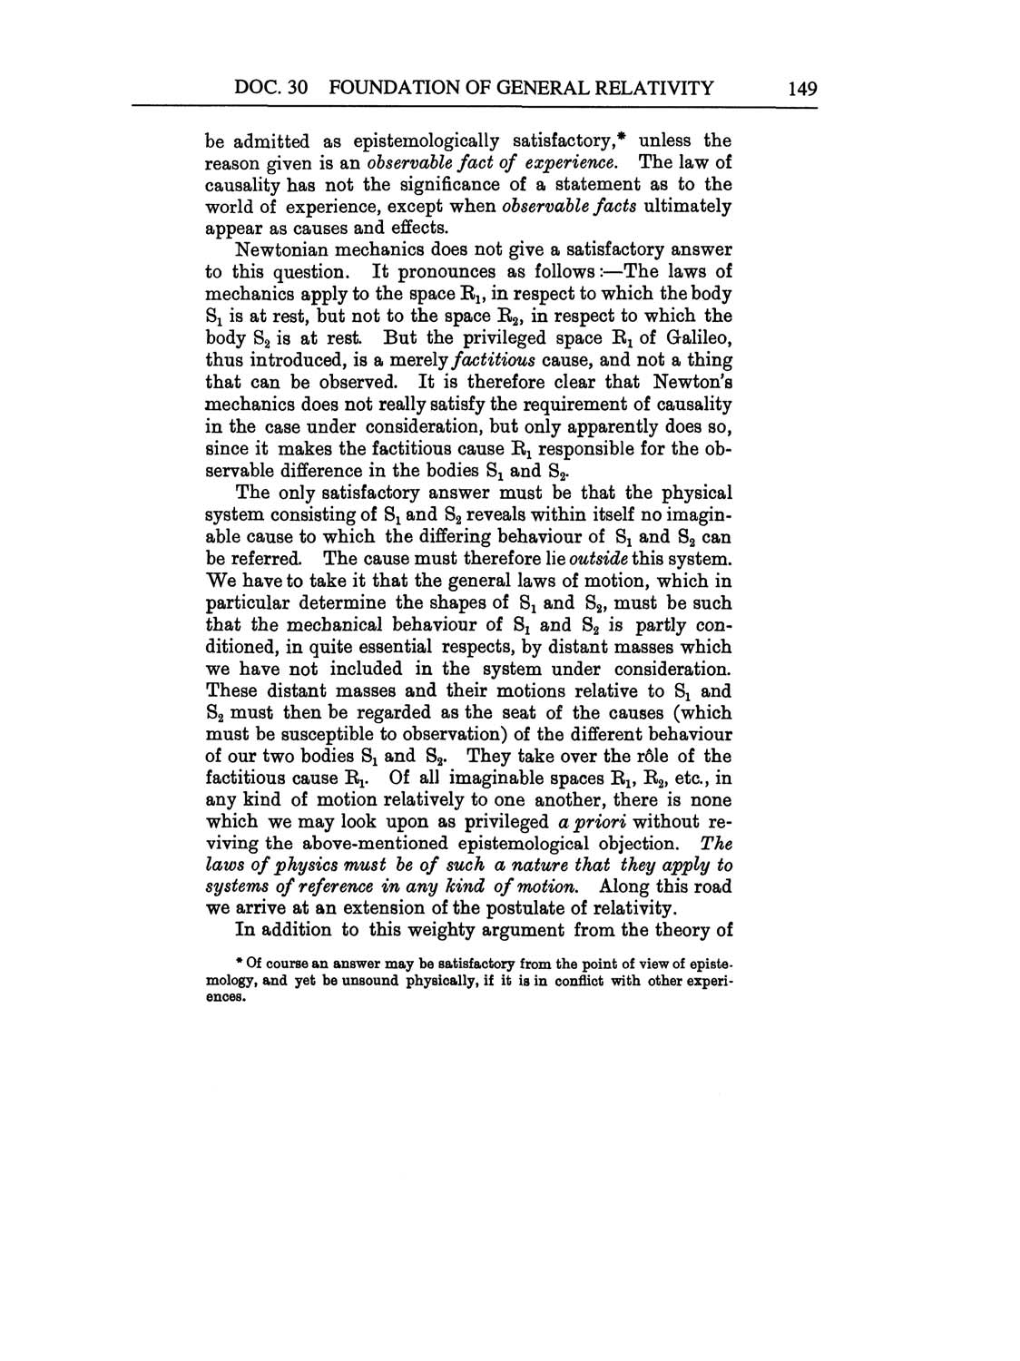 Volume 6: The Berlin Years: Writings, 1914-1917 (English translation supplement) page 149